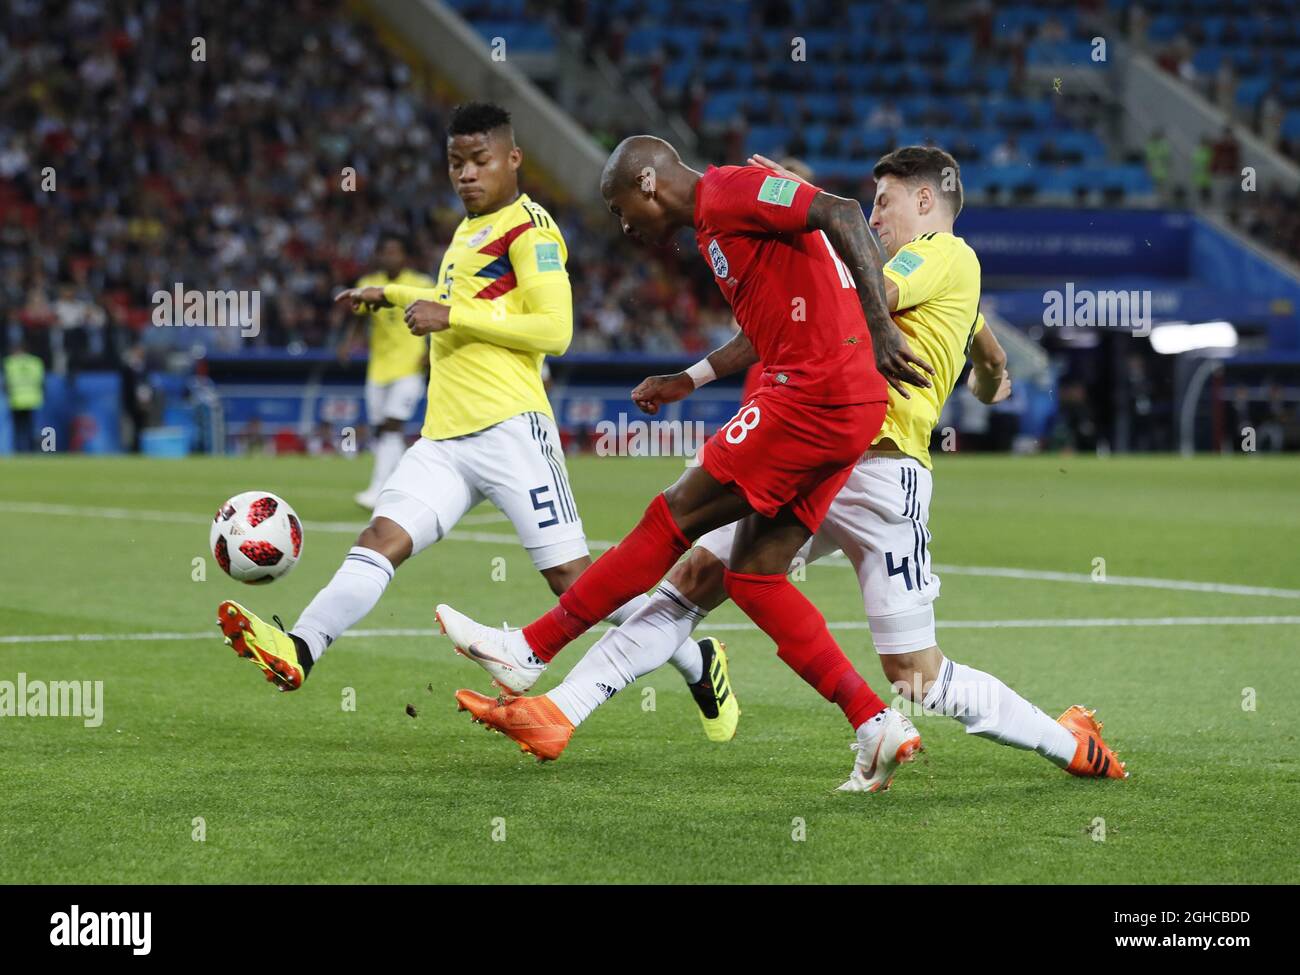 Ashley Young of England fouled by Santiago Arias of Colombia during the FIFA World Cup 2018 Round of 16 match at the Spartak Stadium, Moscow. Picture date 3rd July 2018. Picture credit should read: David Klein/Sportimage via PA Images Stock Photo